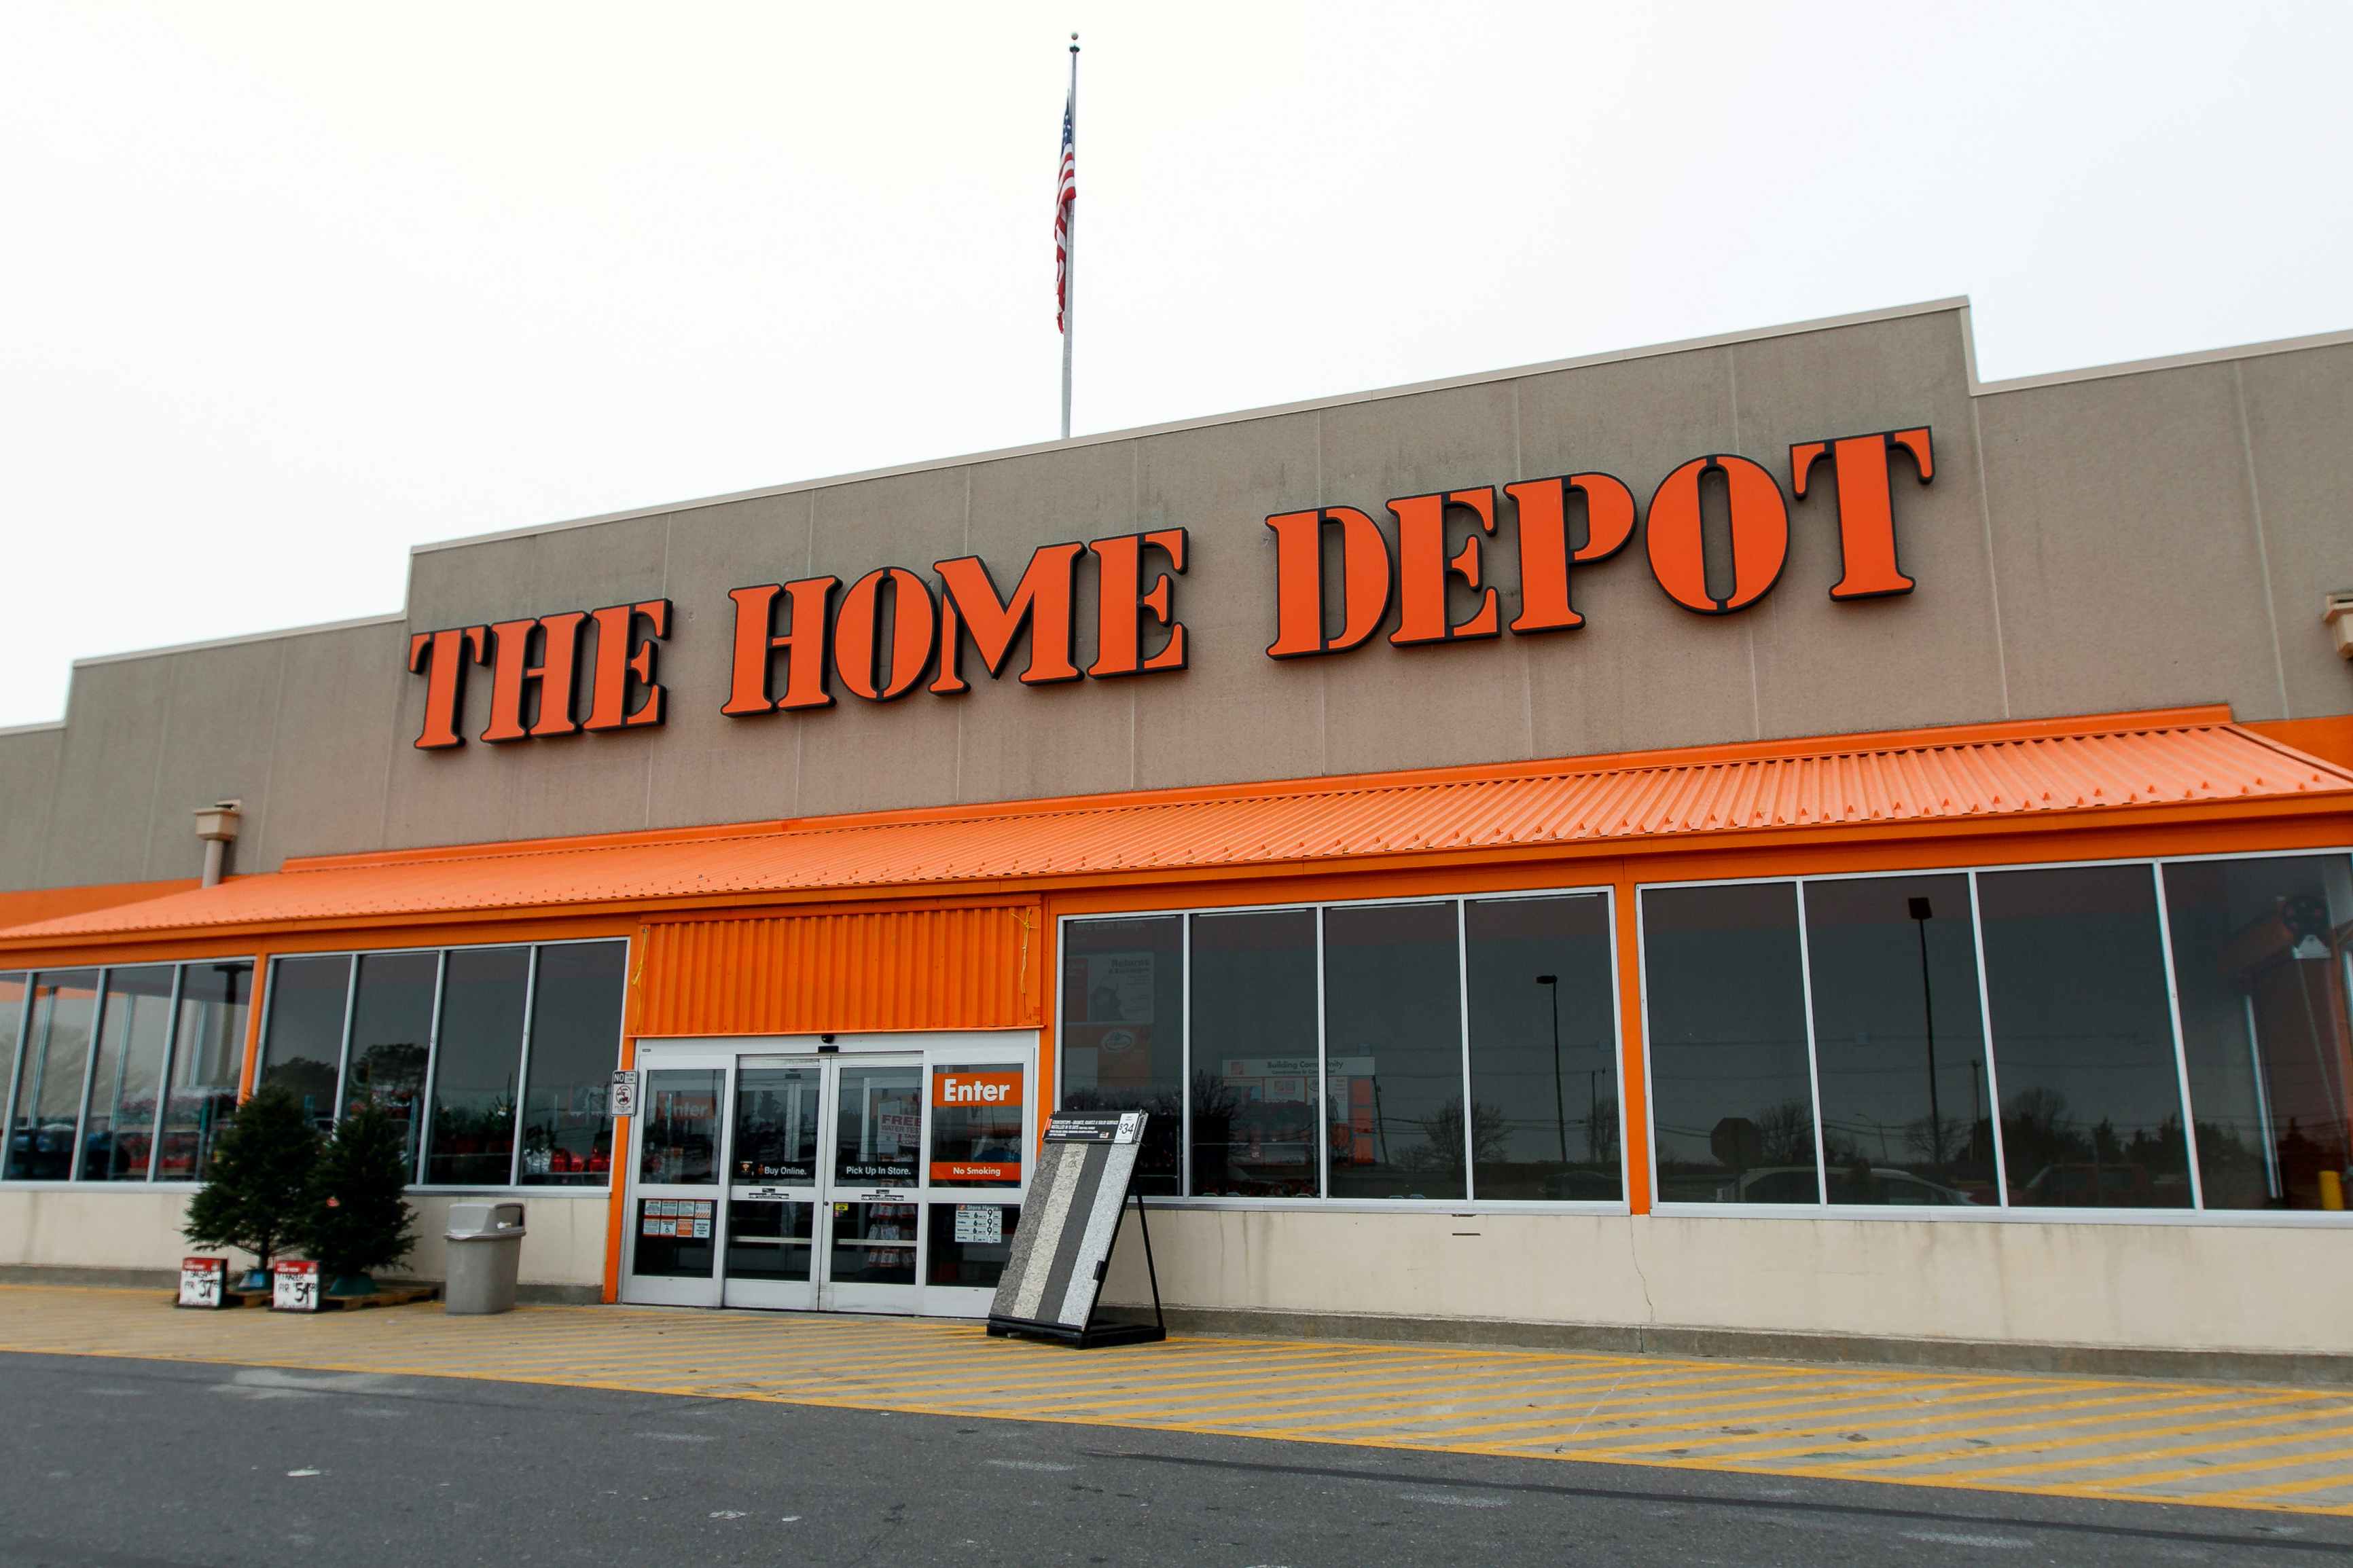 The Home Depot storefront.